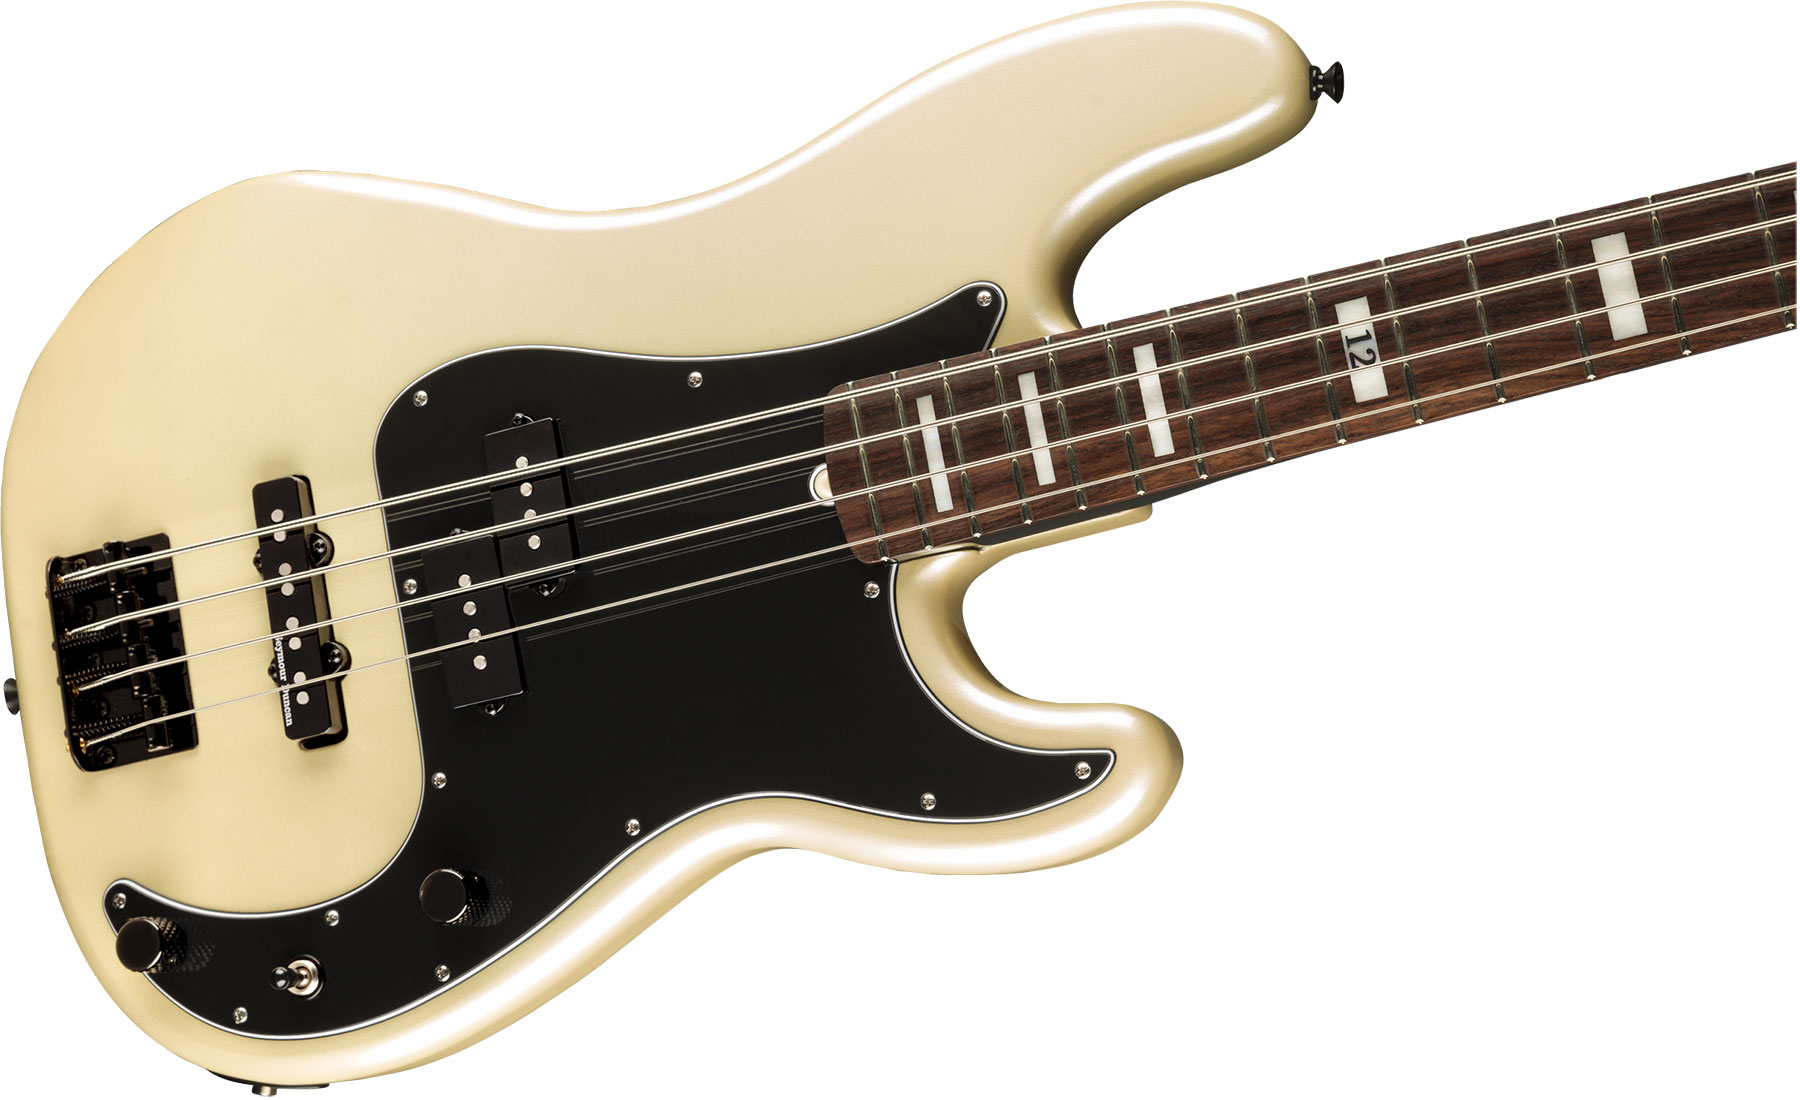 Fender Duff Mckagan Precision Bass Deluxe Signature Rw - White Pearl - Basse Électrique Solid Body - Variation 2